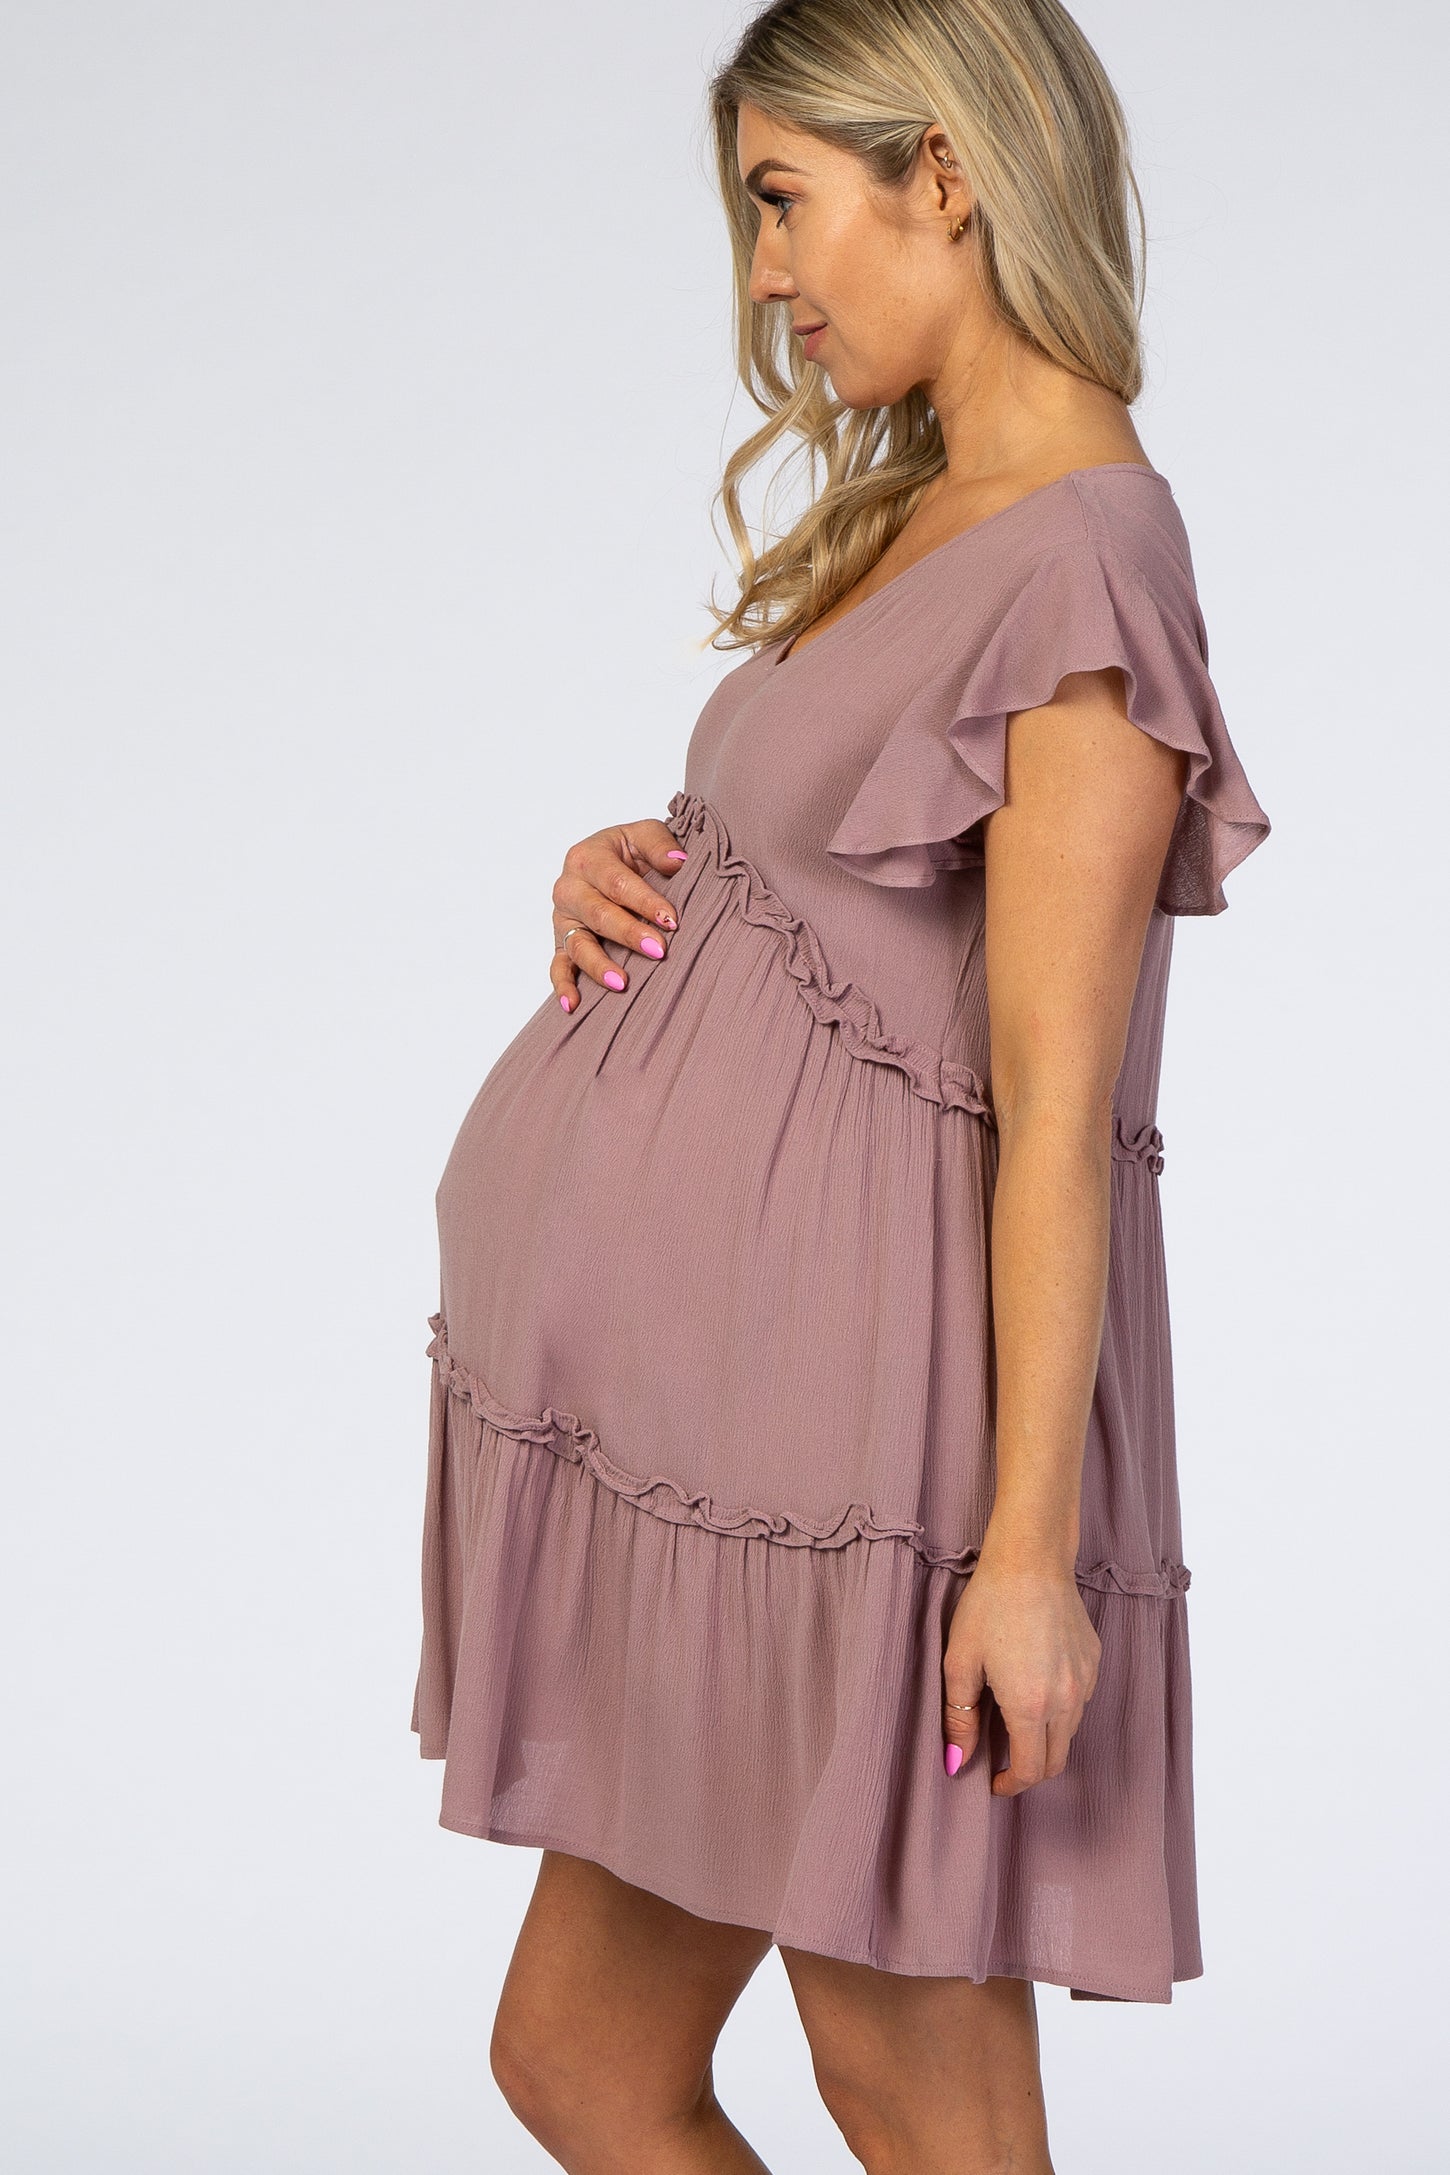 Cheap Ever-Pretty Women's 3/4 Sleeve A-line Lace Embroidery Chiffon Maternity  Party Dress | Joom